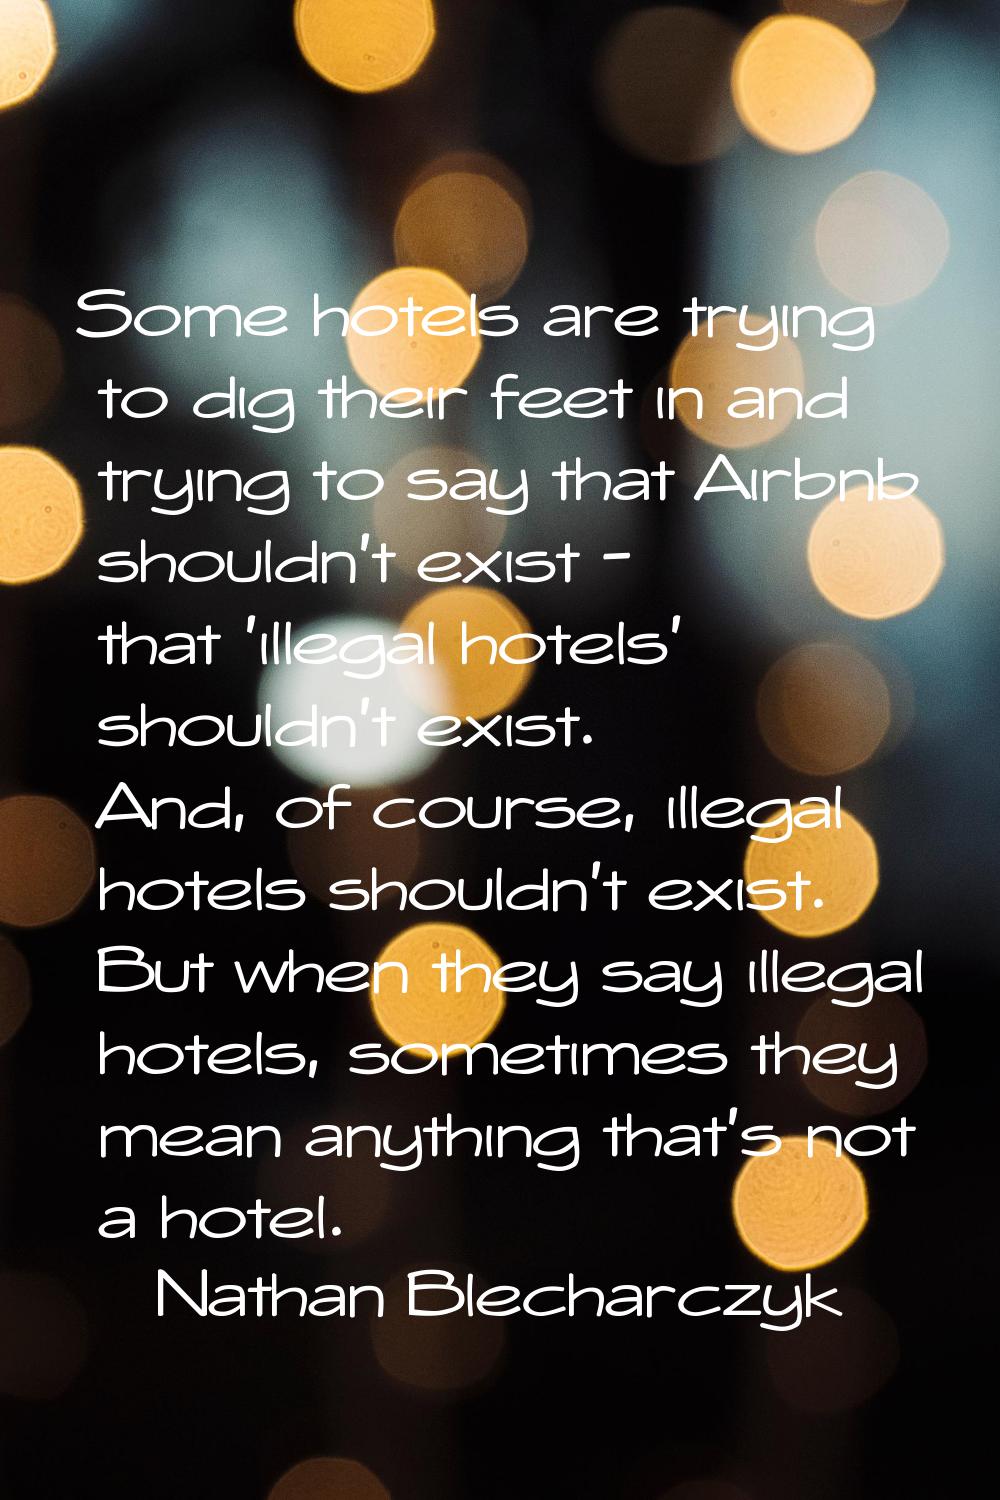 Some hotels are trying to dig their feet in and trying to say that Airbnb shouldn't exist - that 'i